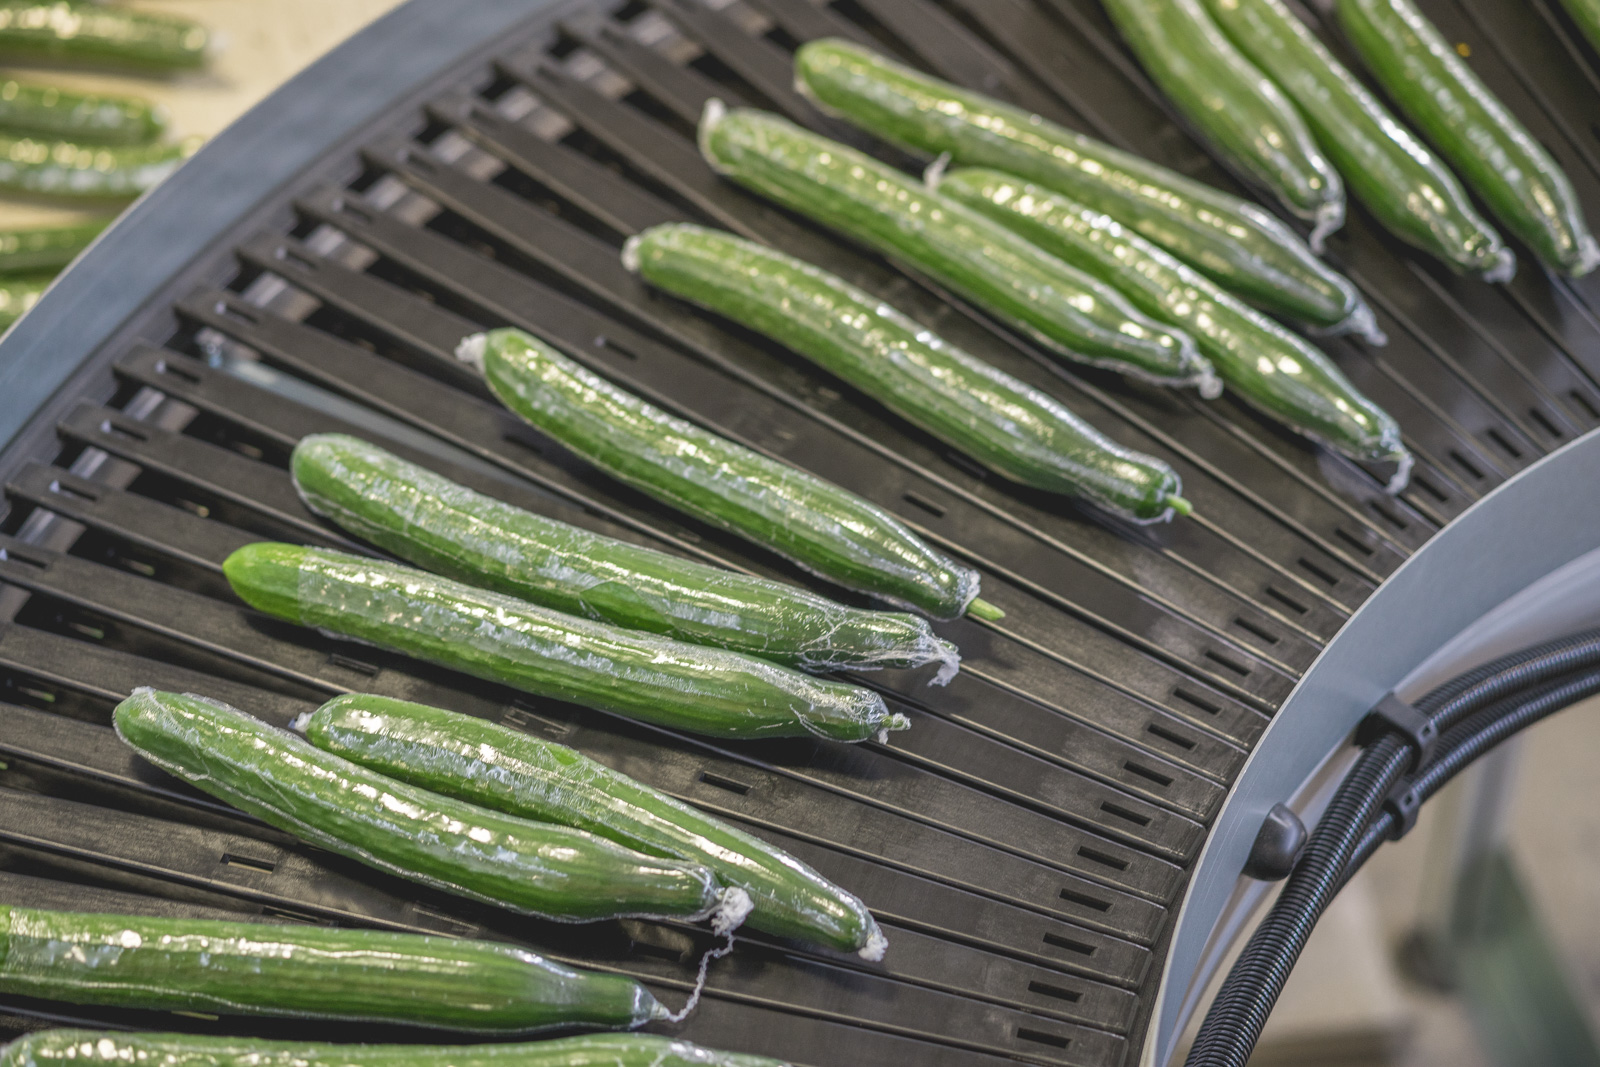 Cucumbers on a packaging line